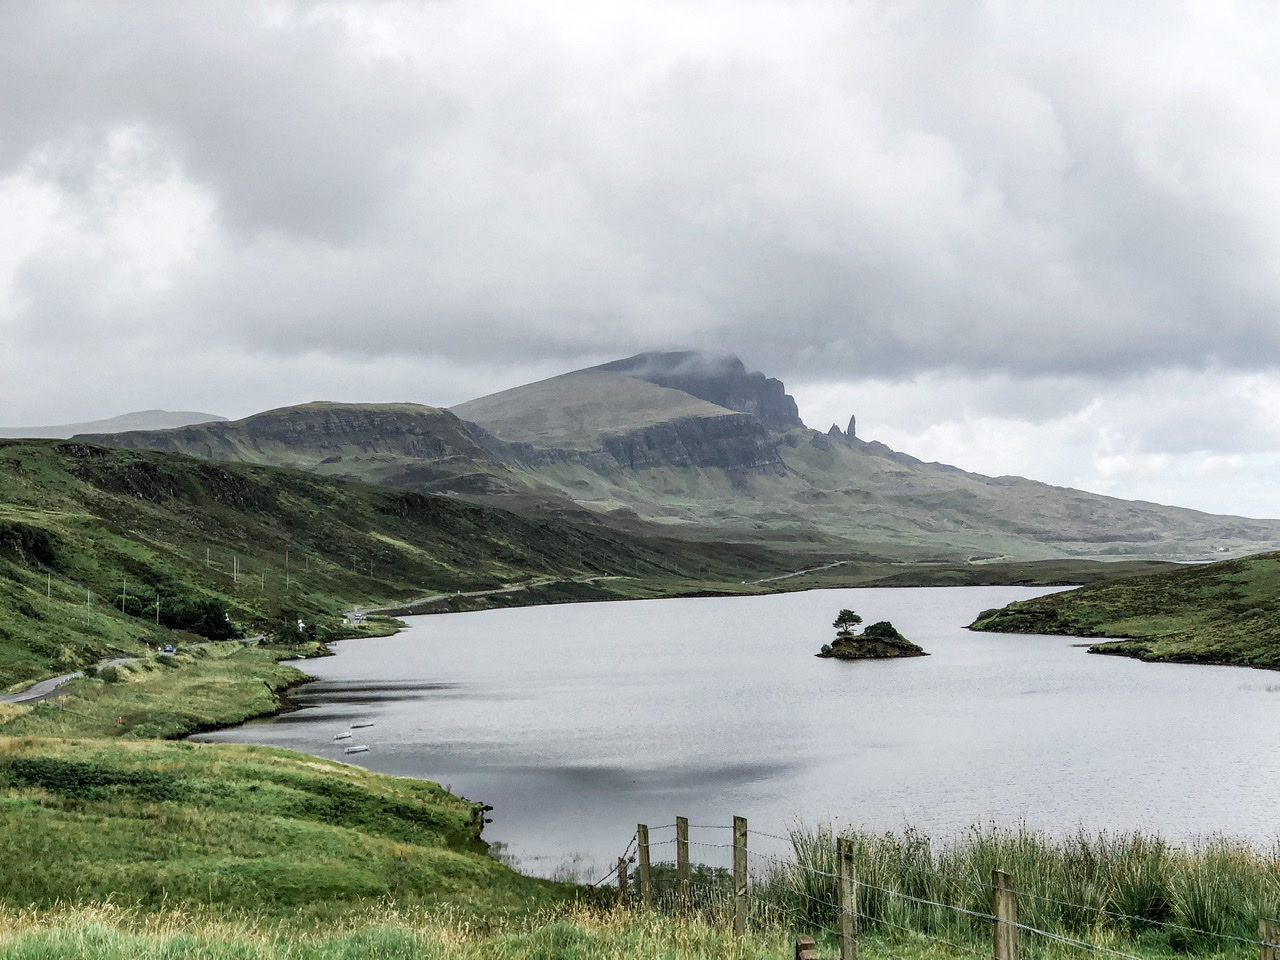 View of Old Man of Storr in distance with lake in front surrounded by greenery